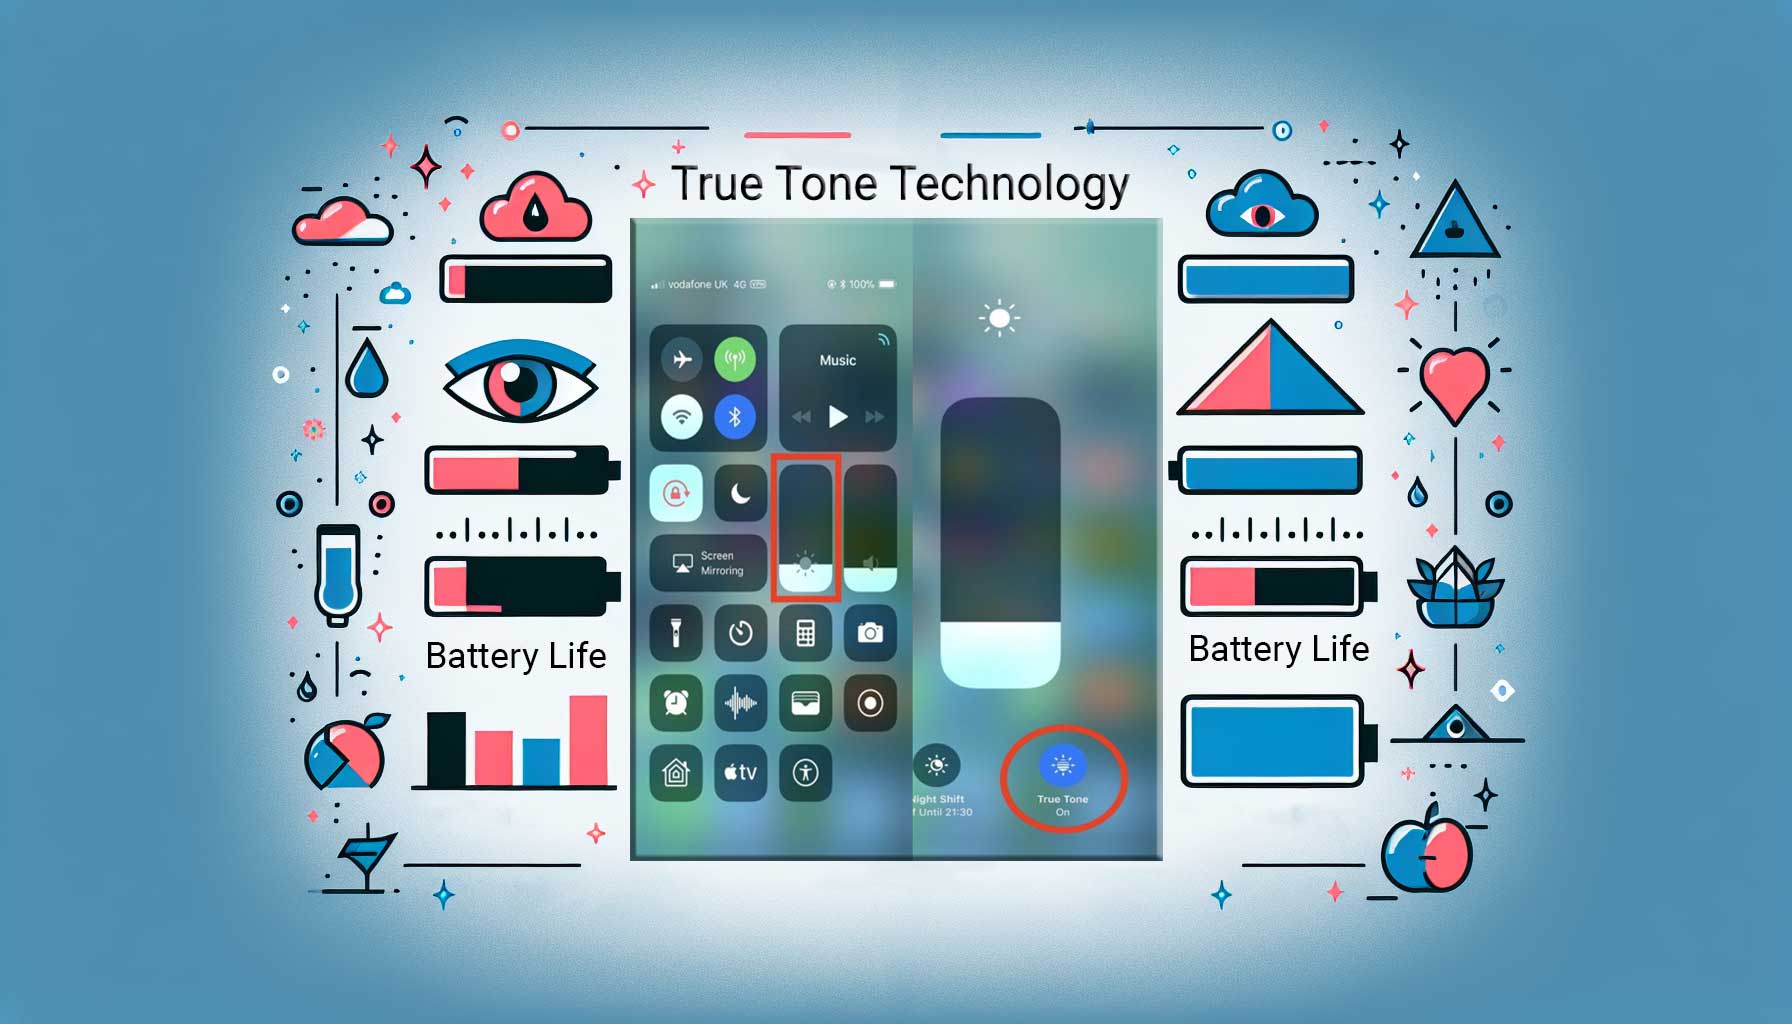 The impact of True Tone on battery life and eye strain